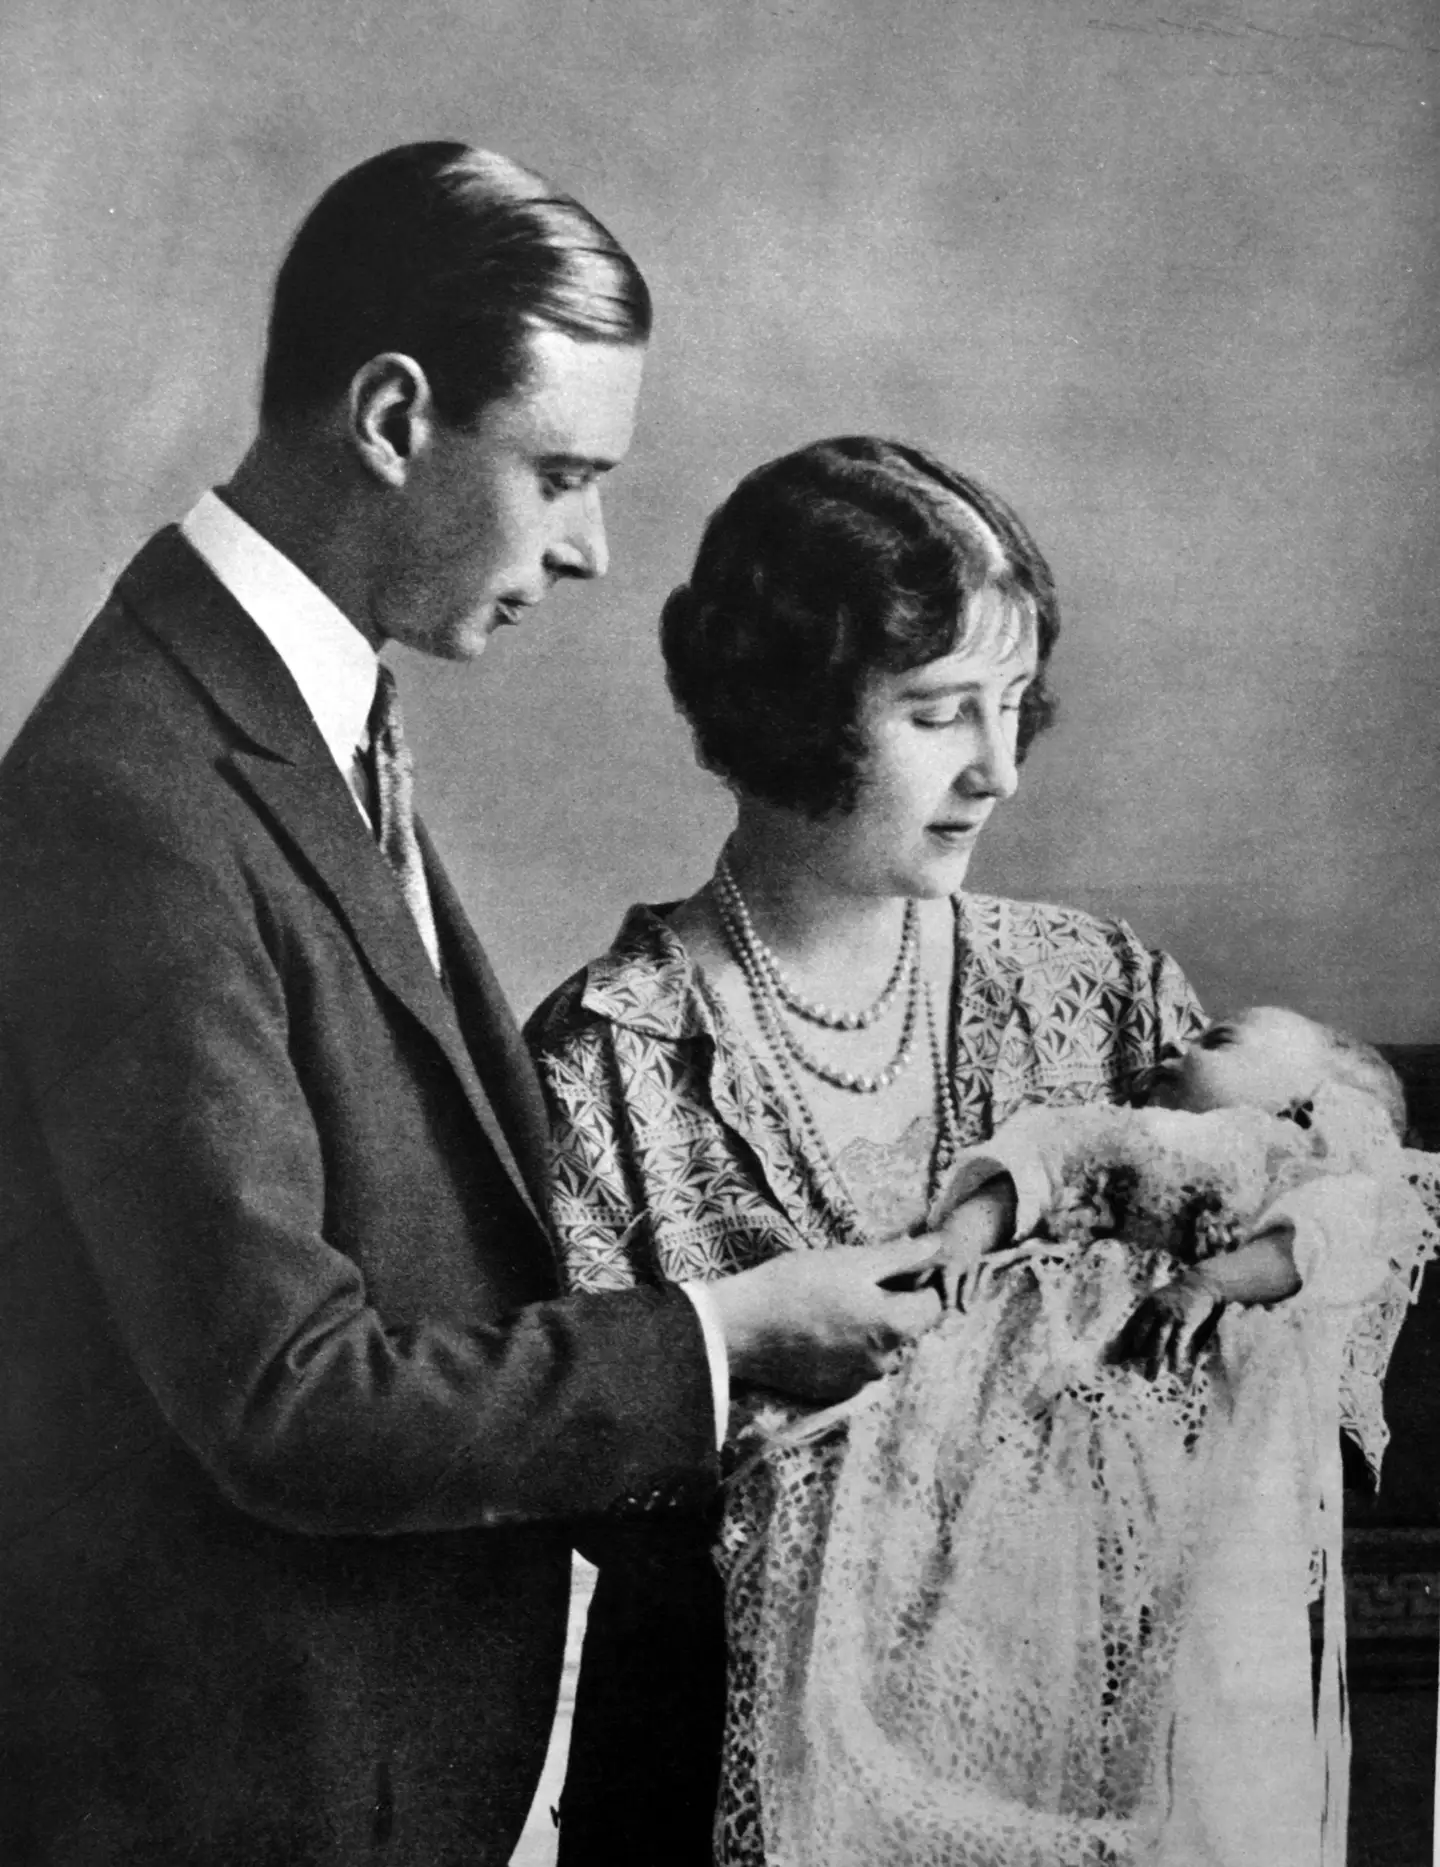 Family portrait of the Duke and Duchess of York (later King George VI and Queen Elizabeth) with the newborn Princess (later Queen Elizabeth II).